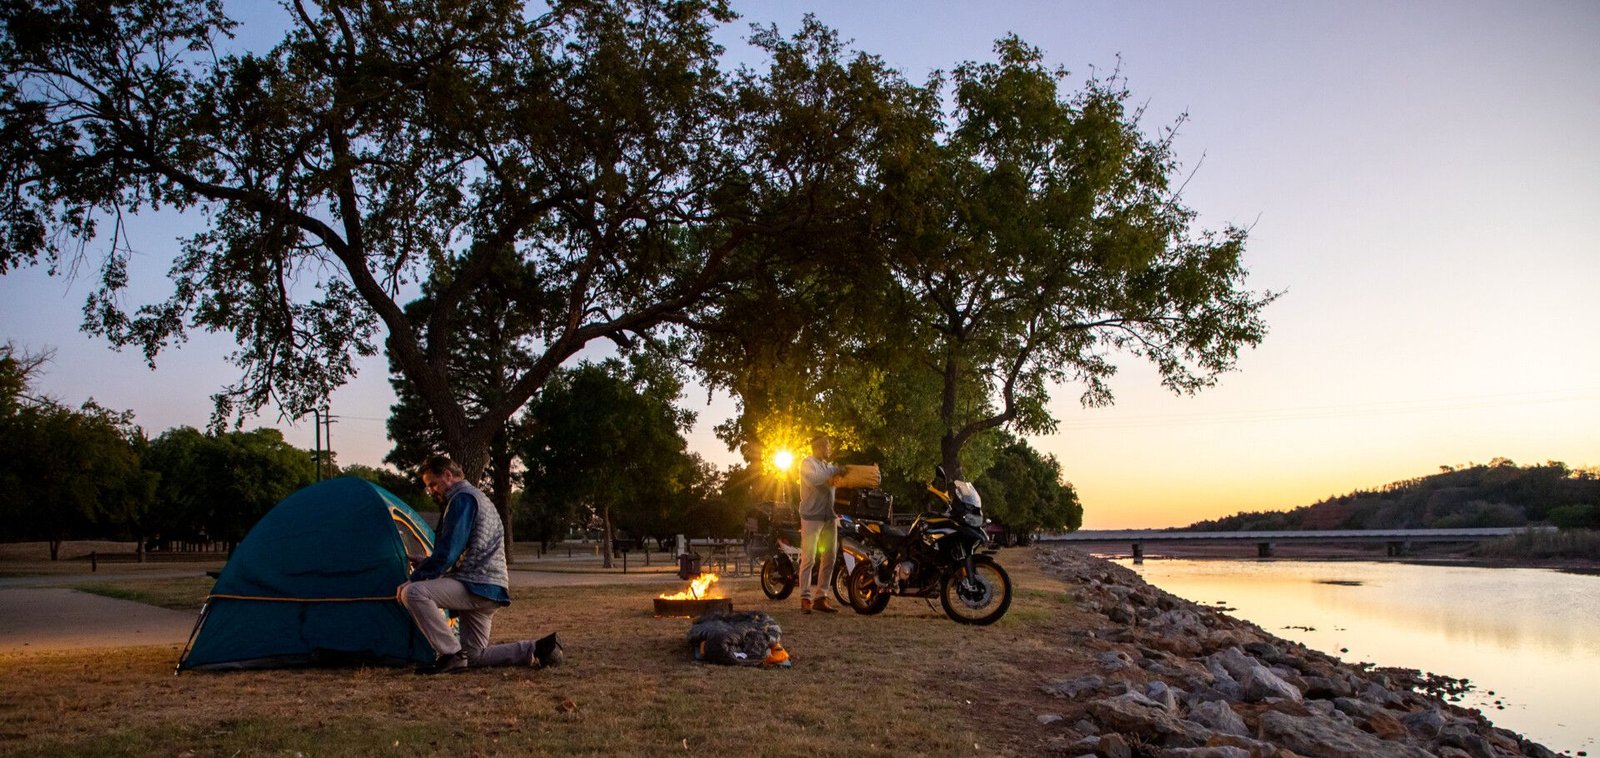 camping in oklahoma explore the sooner states best sites